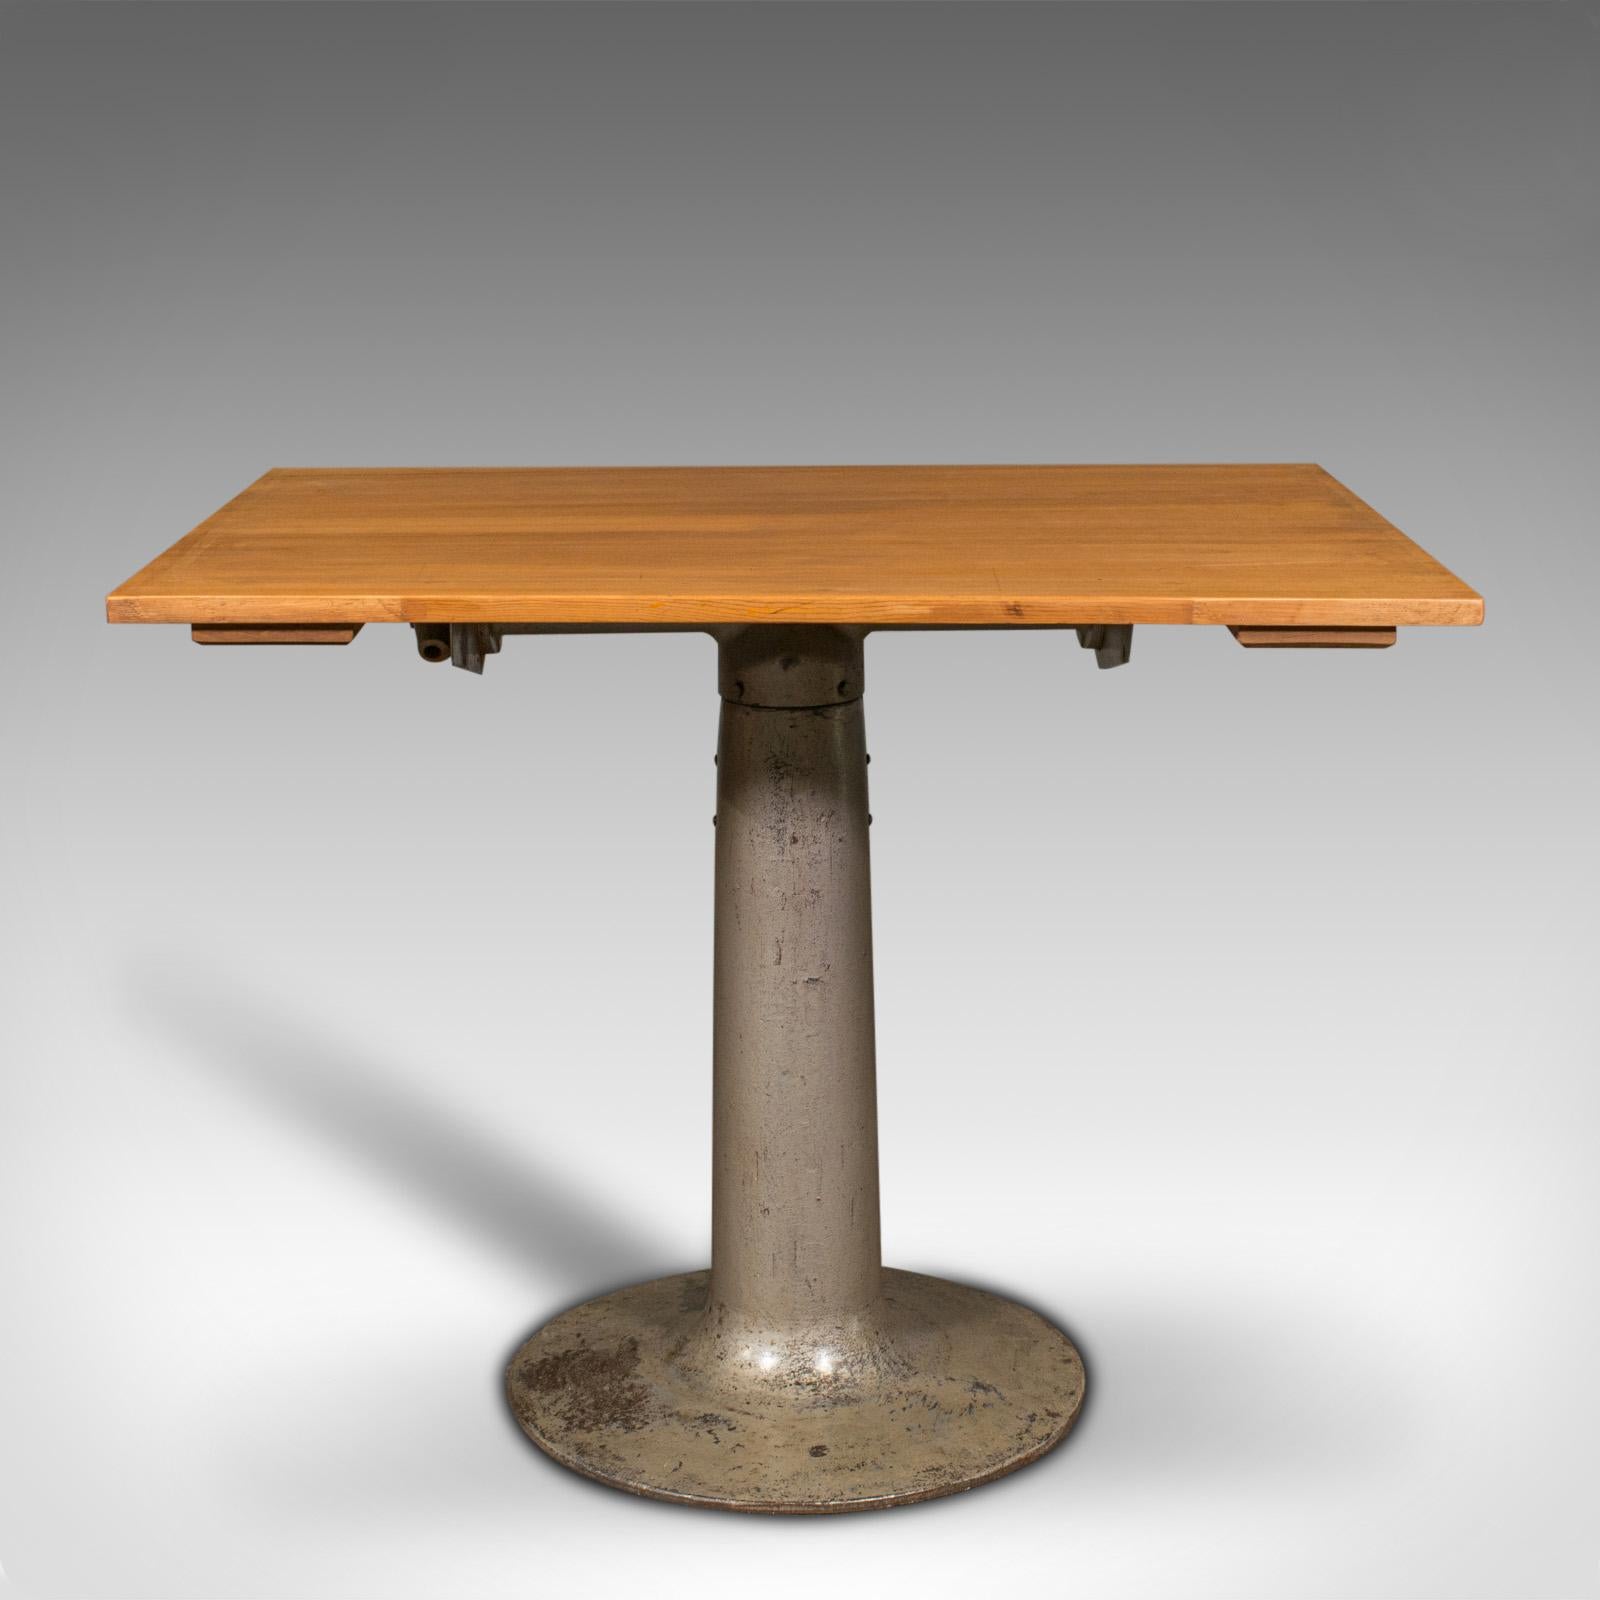 This is a vintage pedestal table. An English, beech and pine kitchen table or desk, dating to the mid 20th century, circa 1950.

Graced with an appealing mid century industrial aesthetic
Displays a desirable aged patina and in good order
Beech and